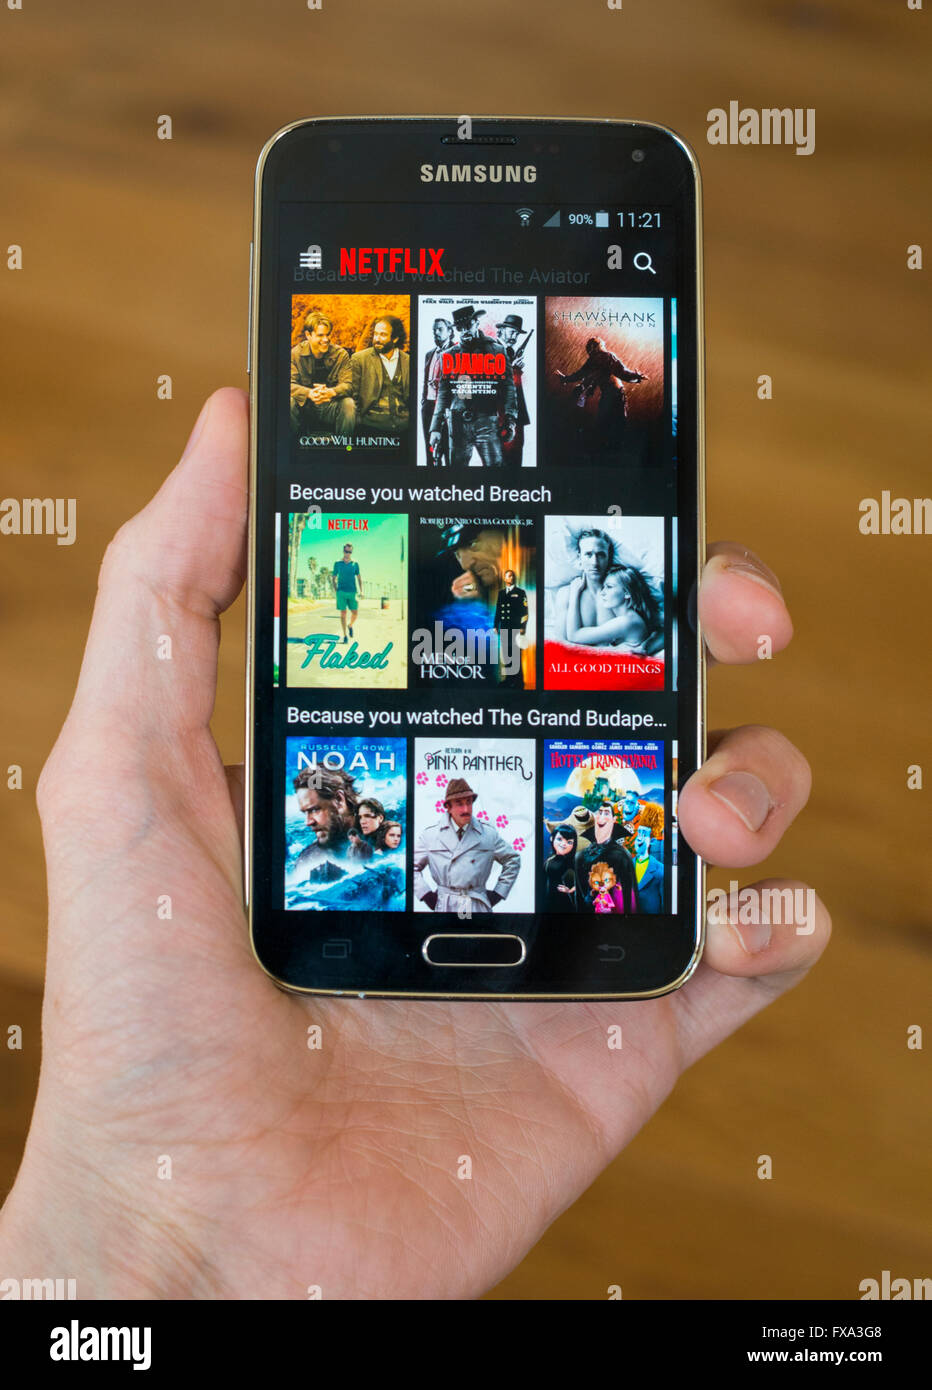 A hand holding a Samsung S5 phone with the Netlfix app open, showing tv shows and films available to watch. Stock Photo